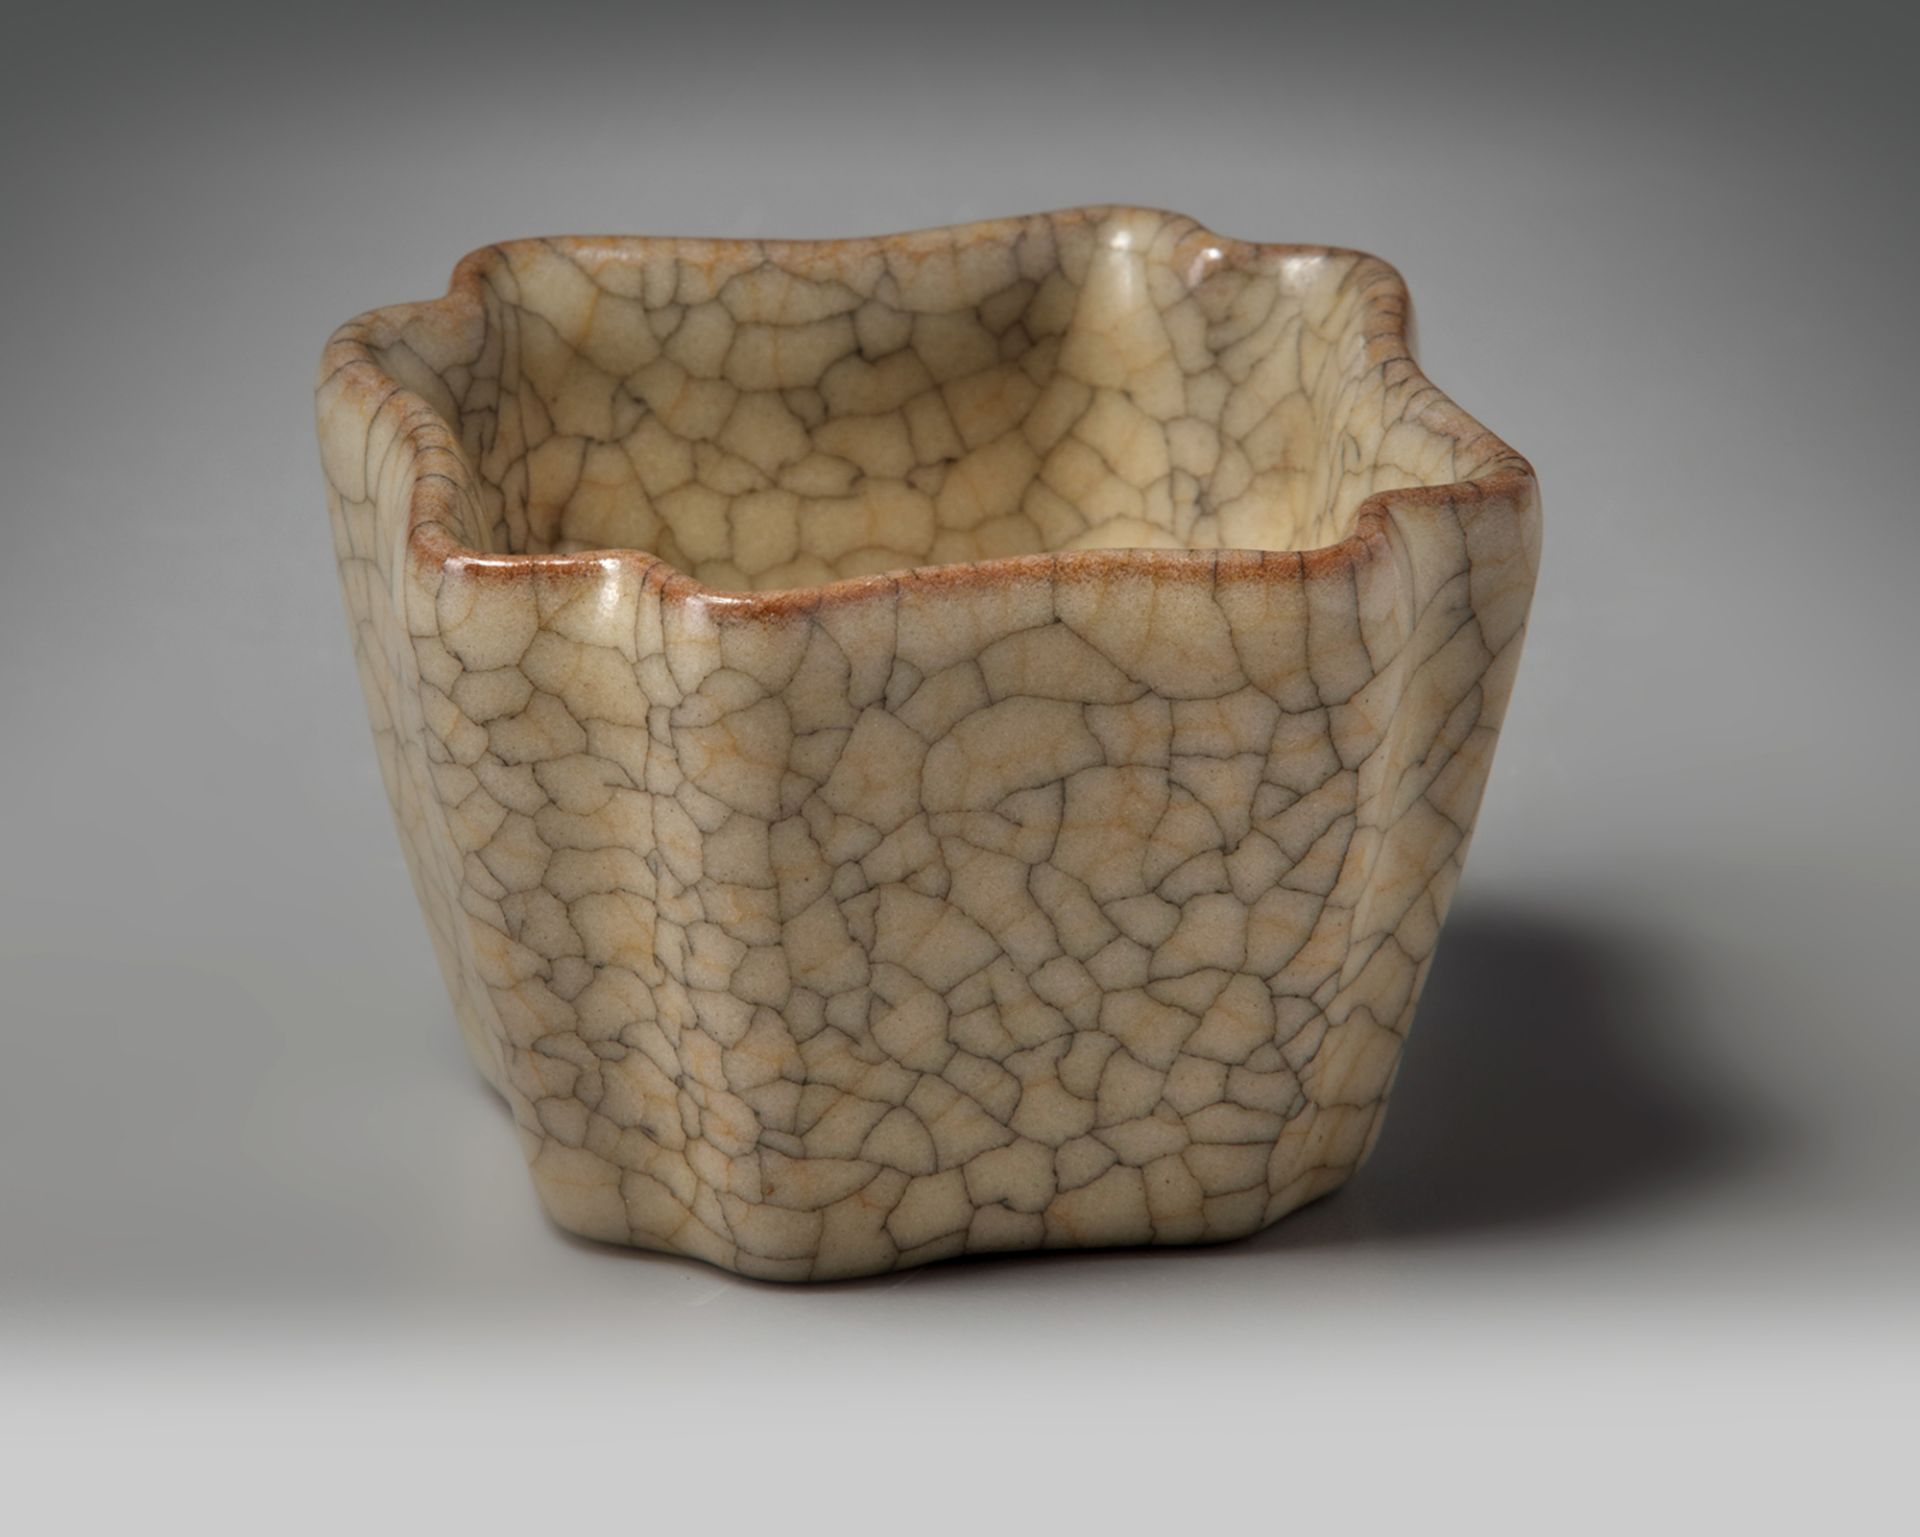 A CHINESE CRACKLE-GLAZED SQUARE-SECTION CUP, QING DYNASTY (1644-1911) - Image 5 of 10